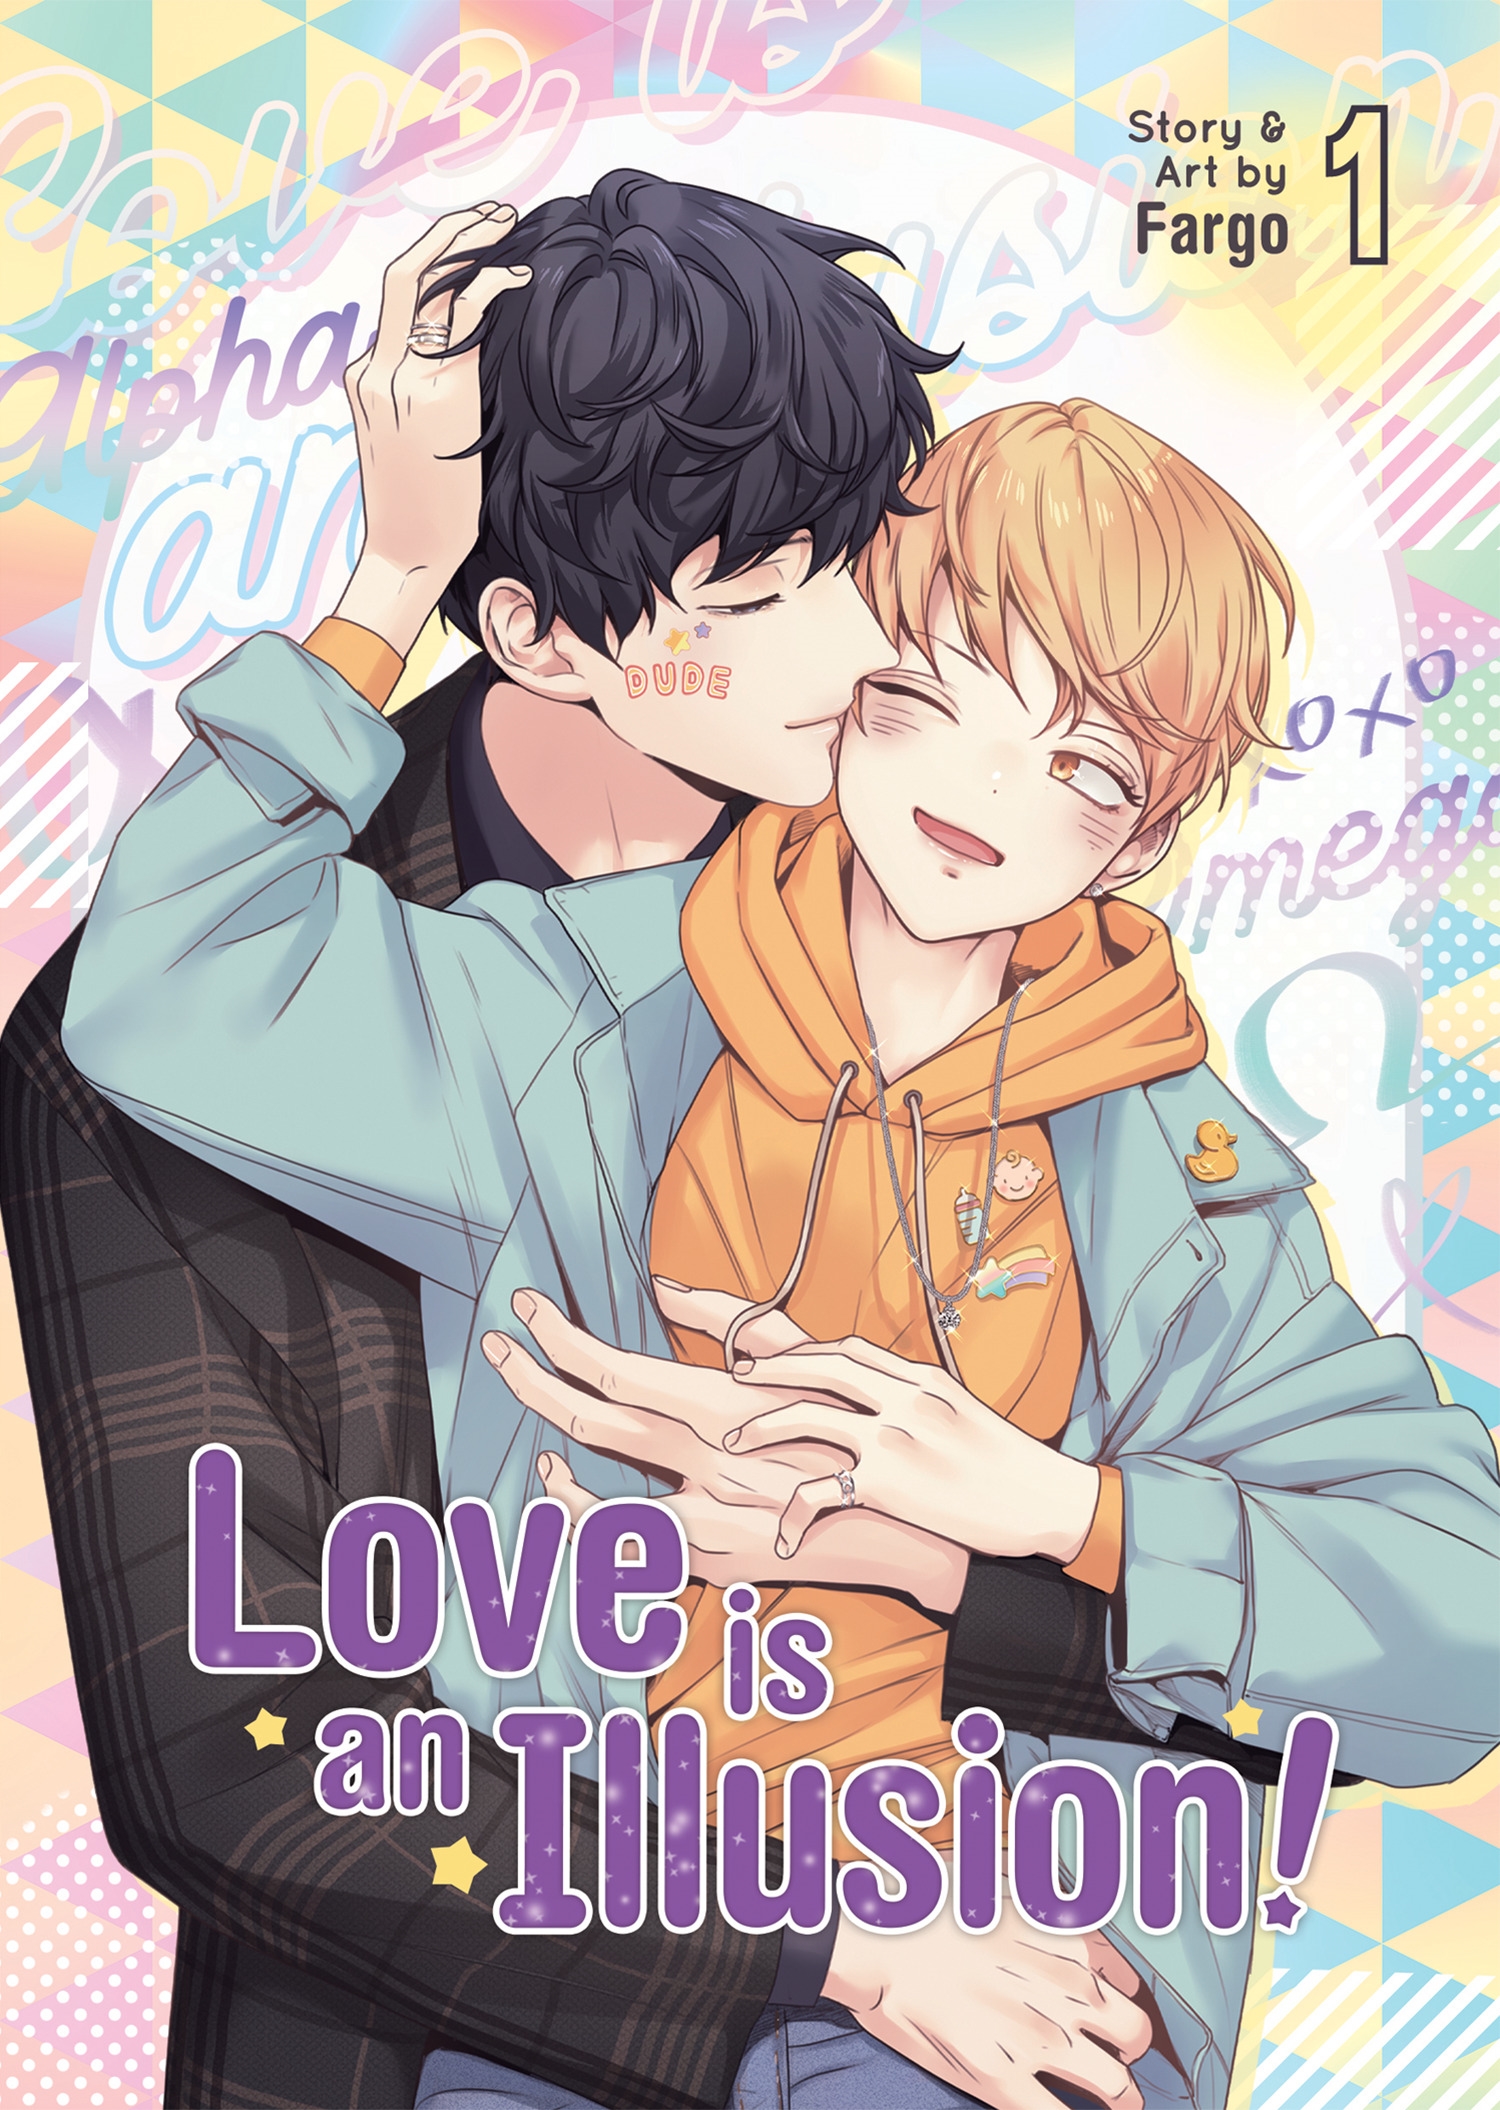 Love Is An Illusion Ch 1 Love is an Illusion! Vol. 1 by Fargo - Penguin Books New Zealand